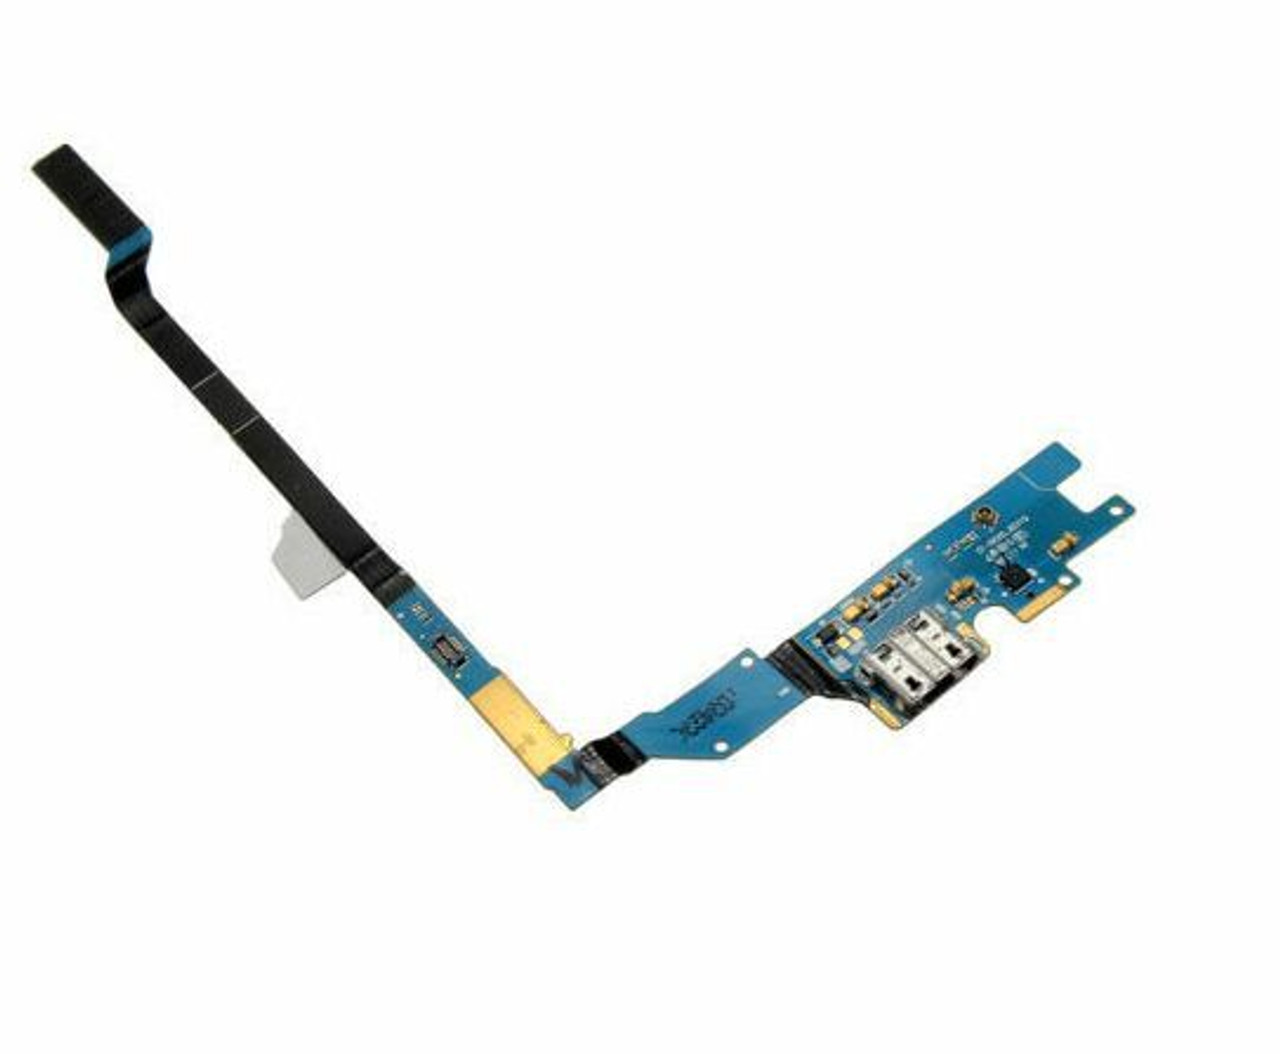 OEM Charger Dock Charging Flex Cable Port USB For Samsung Galaxy S4 Sprint L720T